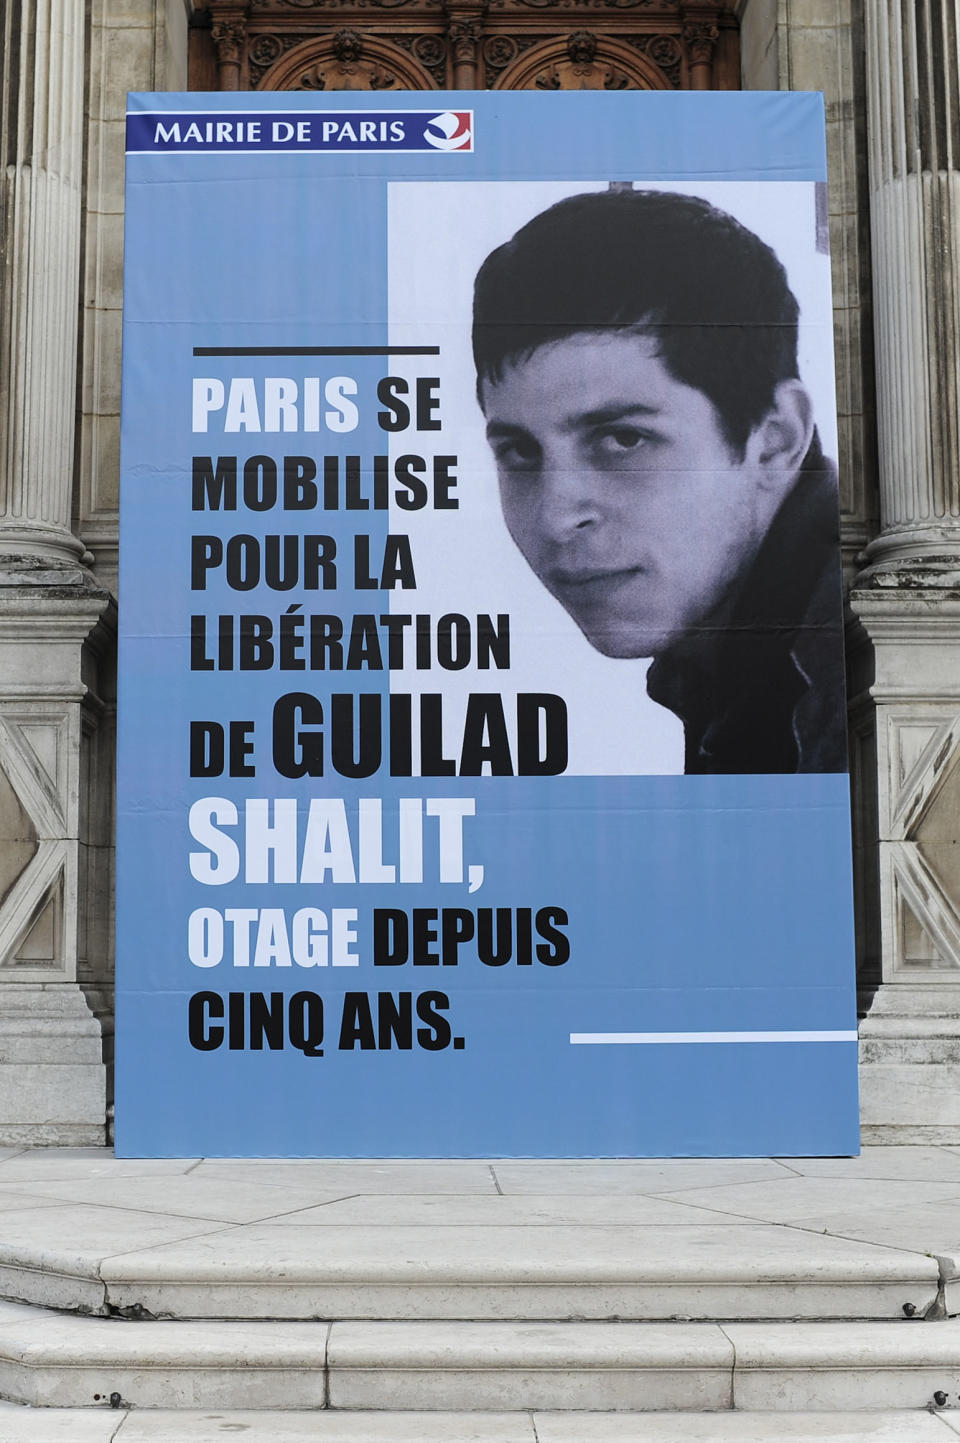 File photo of portrait of Gilad Shalit, a Franco-Israeli soldier captured five years ago, diplayed on the facade at the Paris City Hall